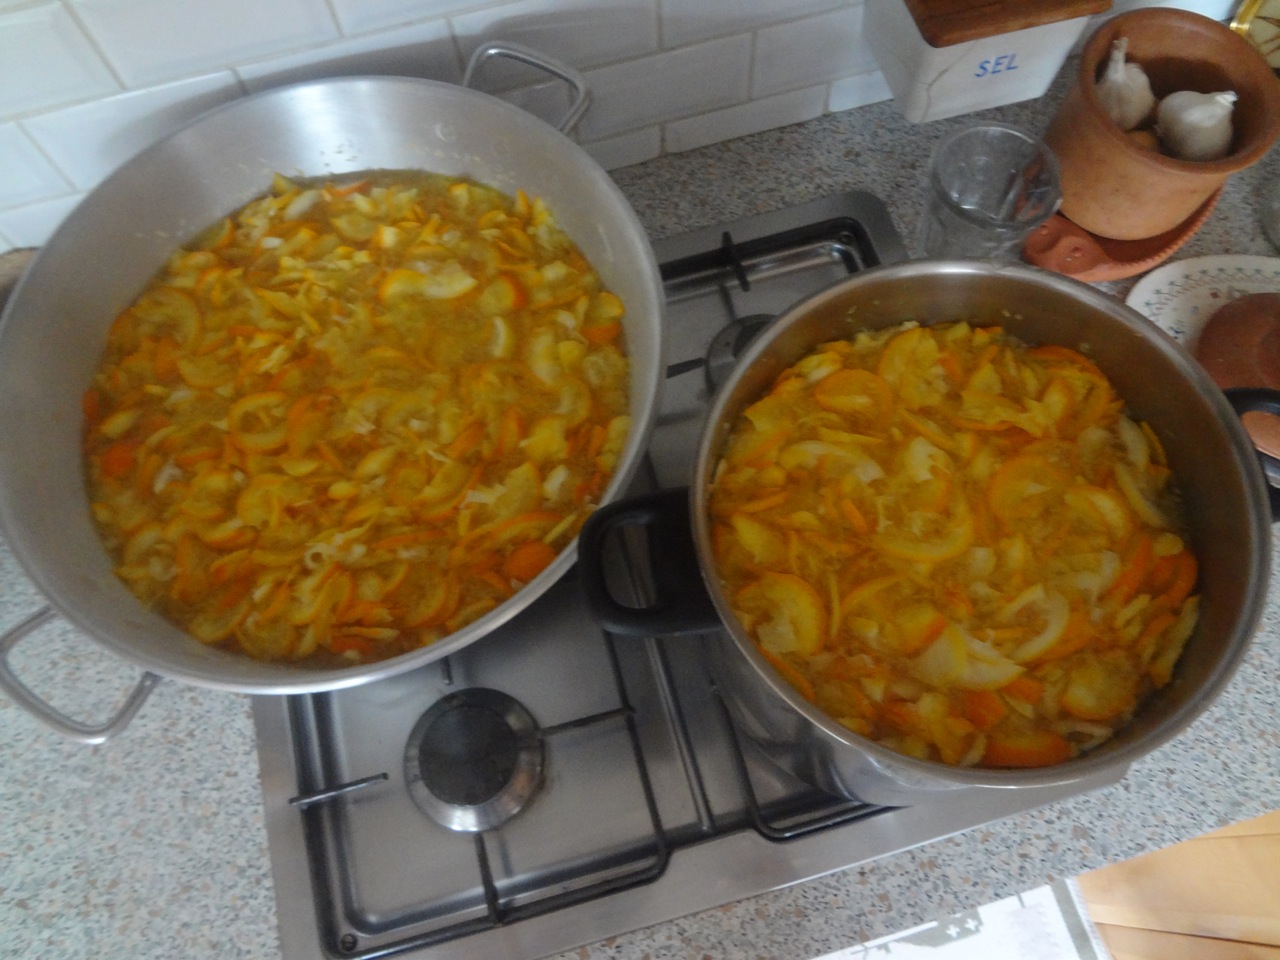 Marmalade in preparation by JC